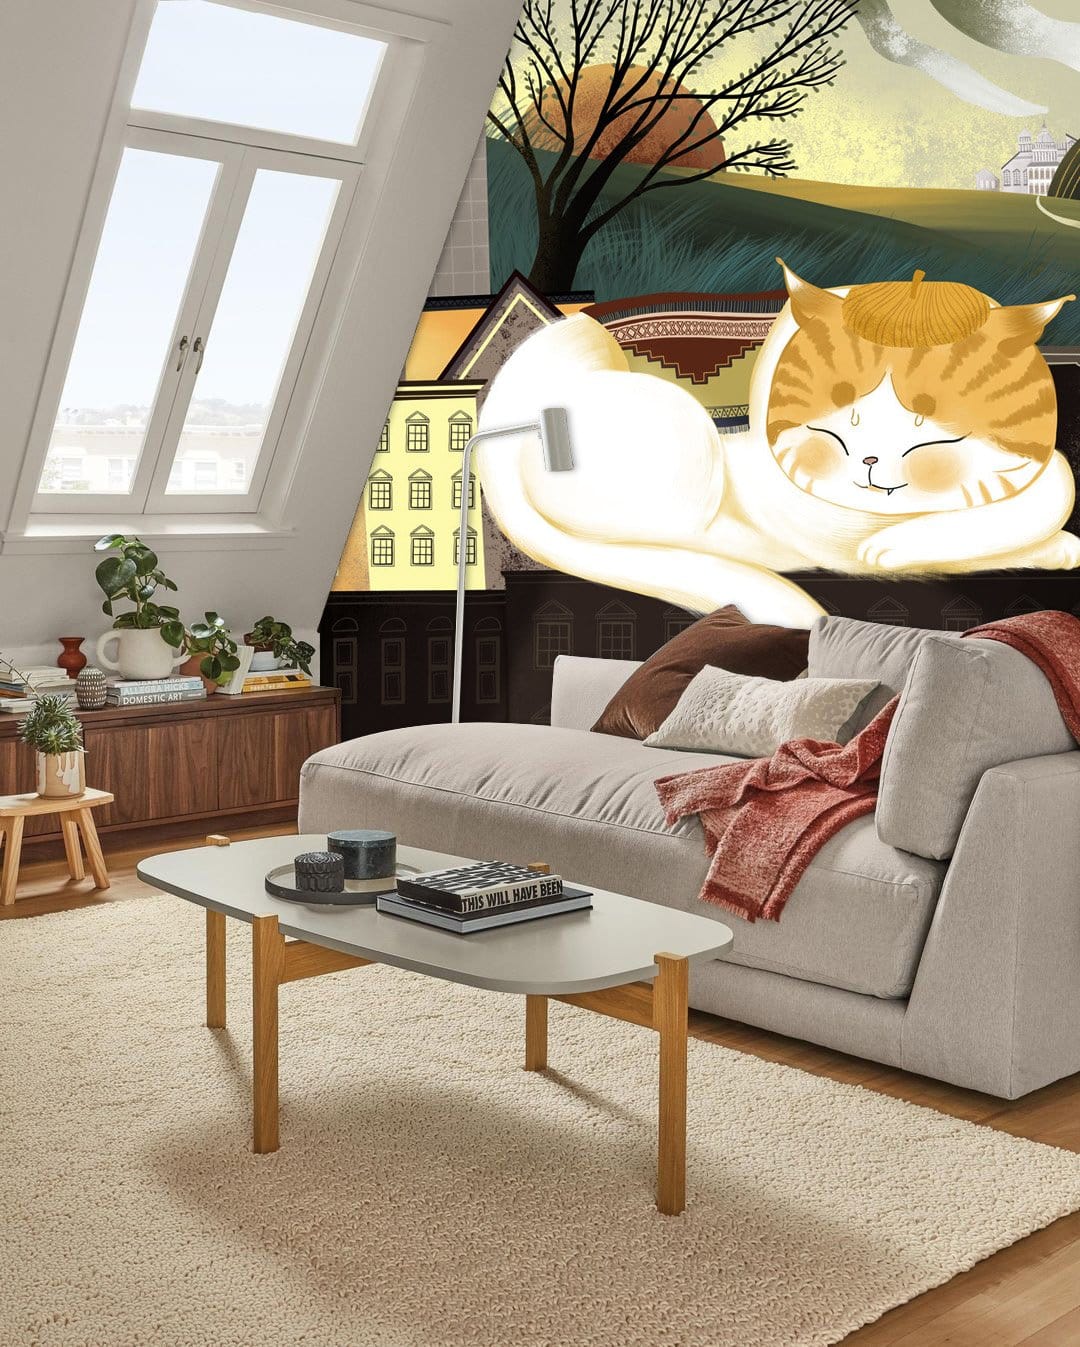 Living Room Animal Wallpaper Mural with a Cat Sleeping on a Rooftop